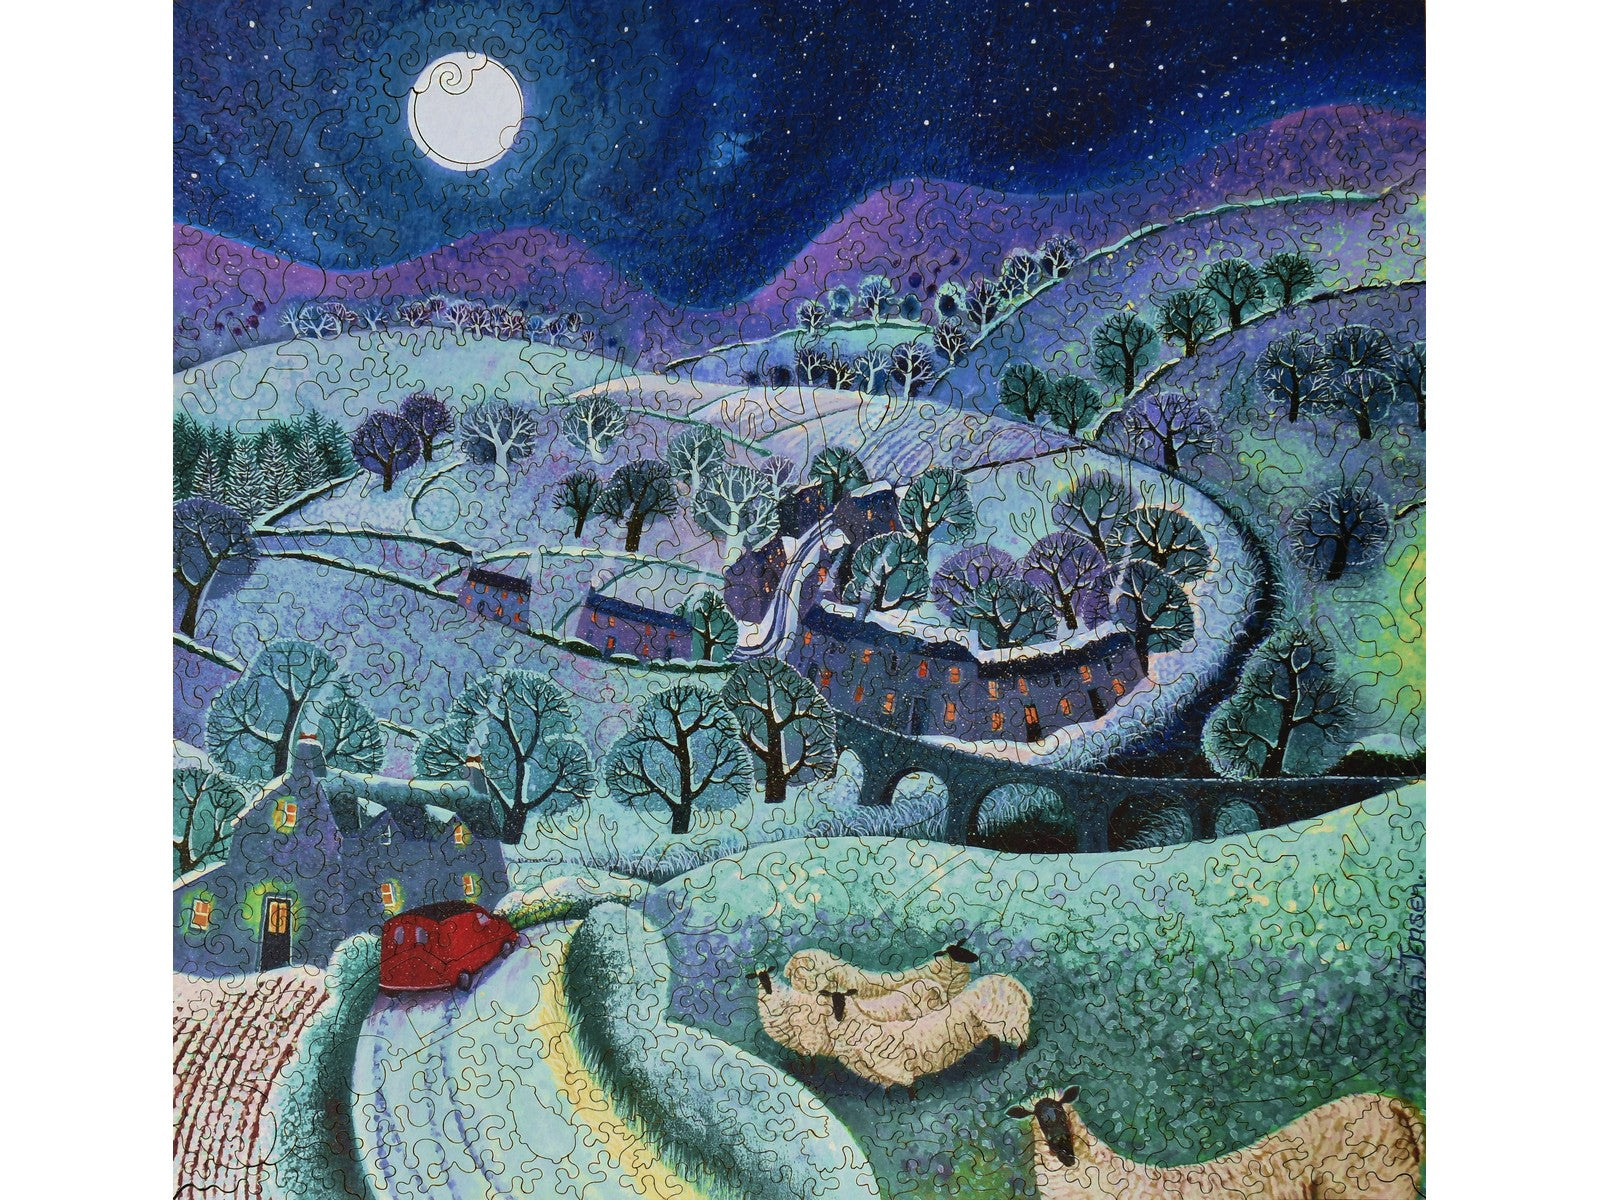 The front of the puzzle, First Sprinkling, which shows snow falling in the countryside at night.